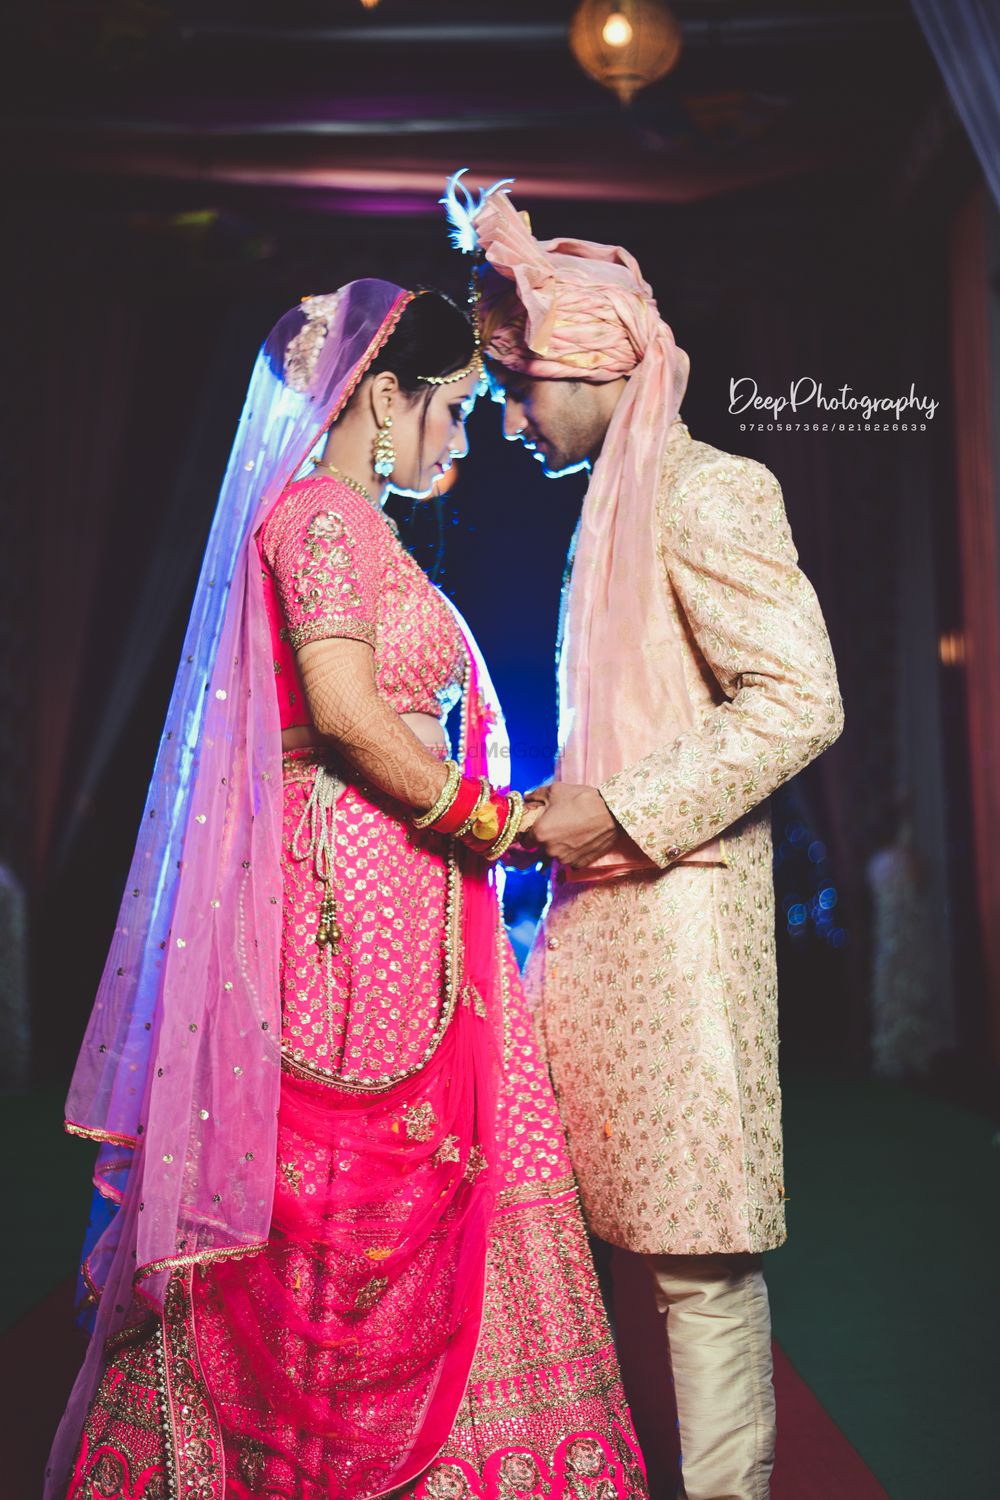 Photo From couples portrait - By Deep Photography